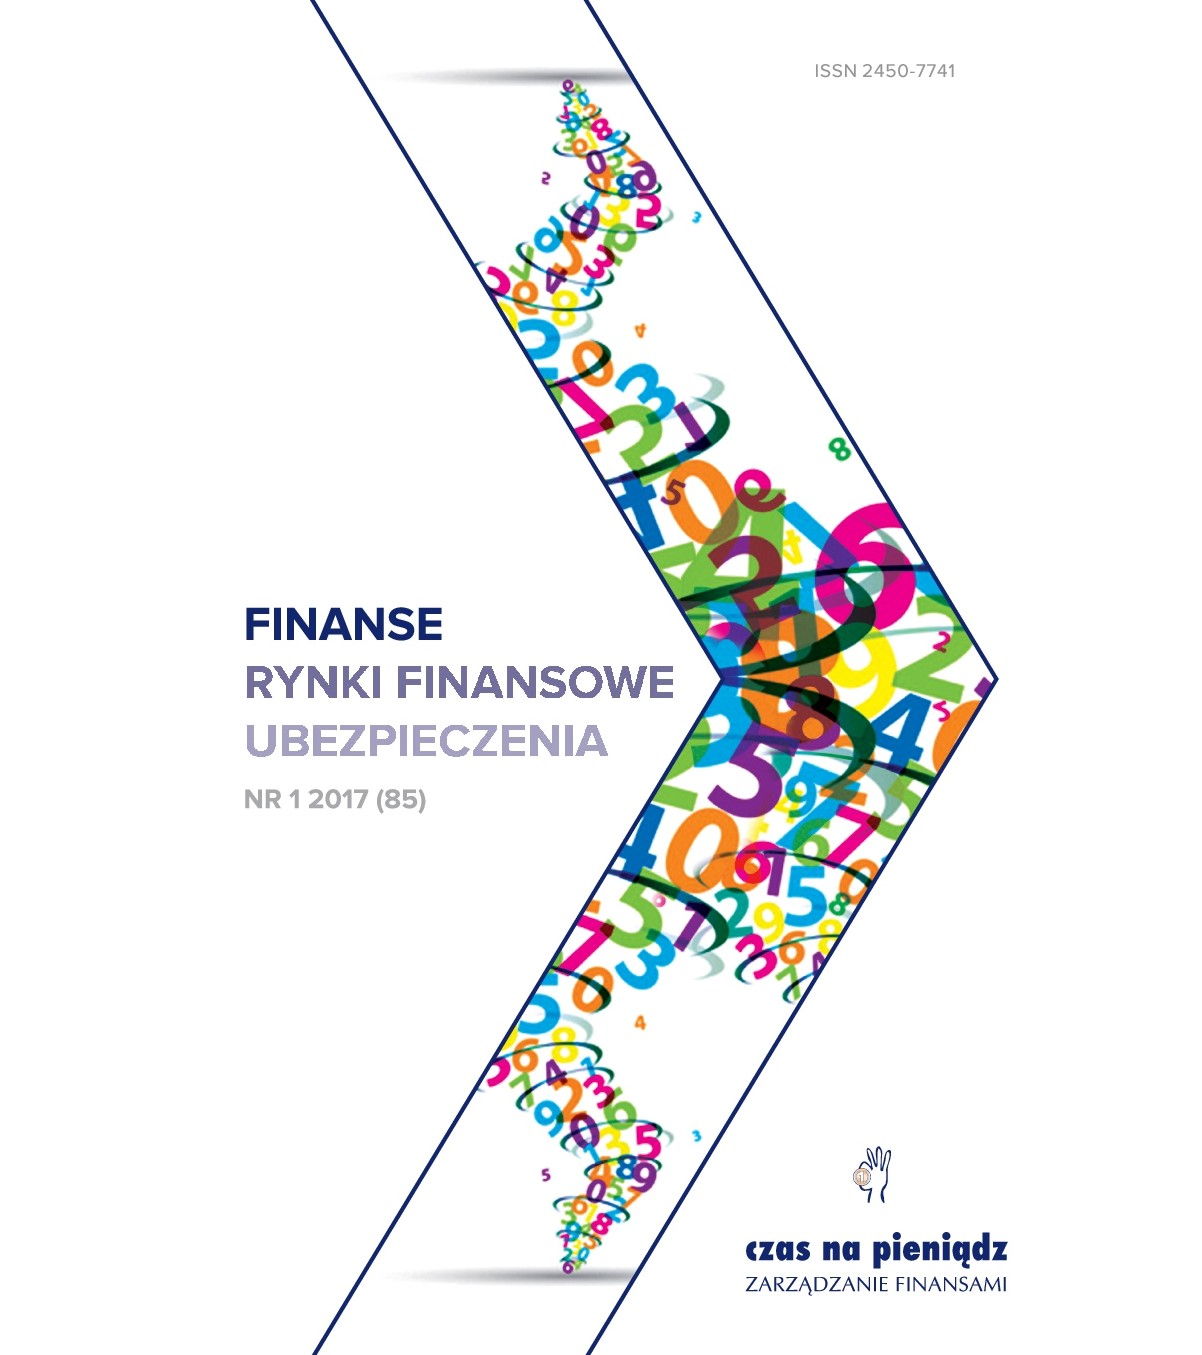 Self-financing in Agriculture Enterprises Performance Cover Image